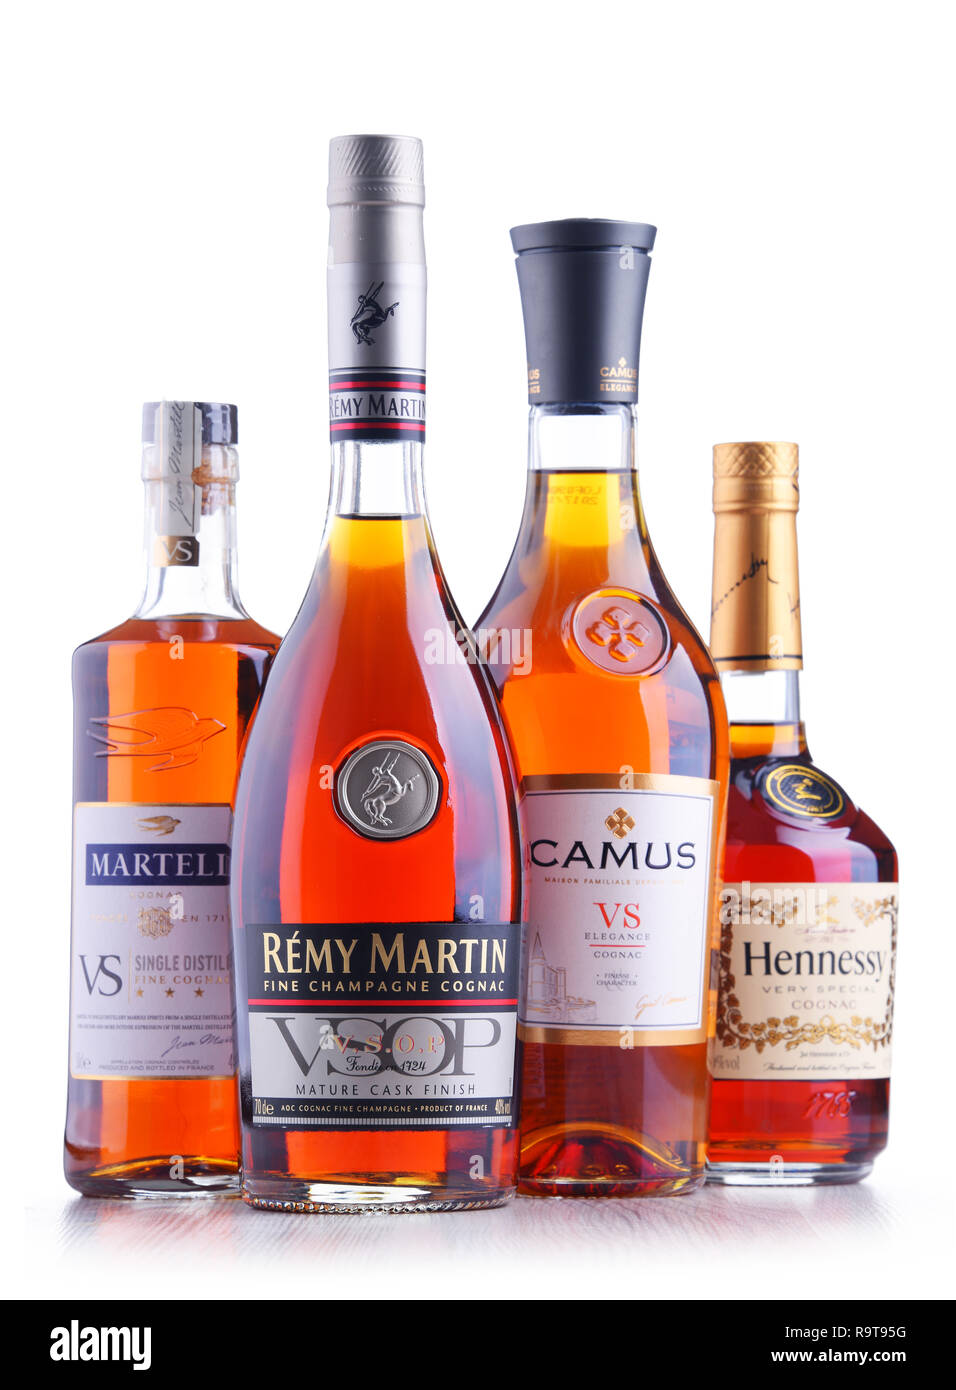 D.w.z sensor Eerder POZNAN, POL - SEP 27, 2018: Bottles of famous Cognac brands including  Martell, Camus, Hennessy and Remy Martin Stock Photo - Alamy